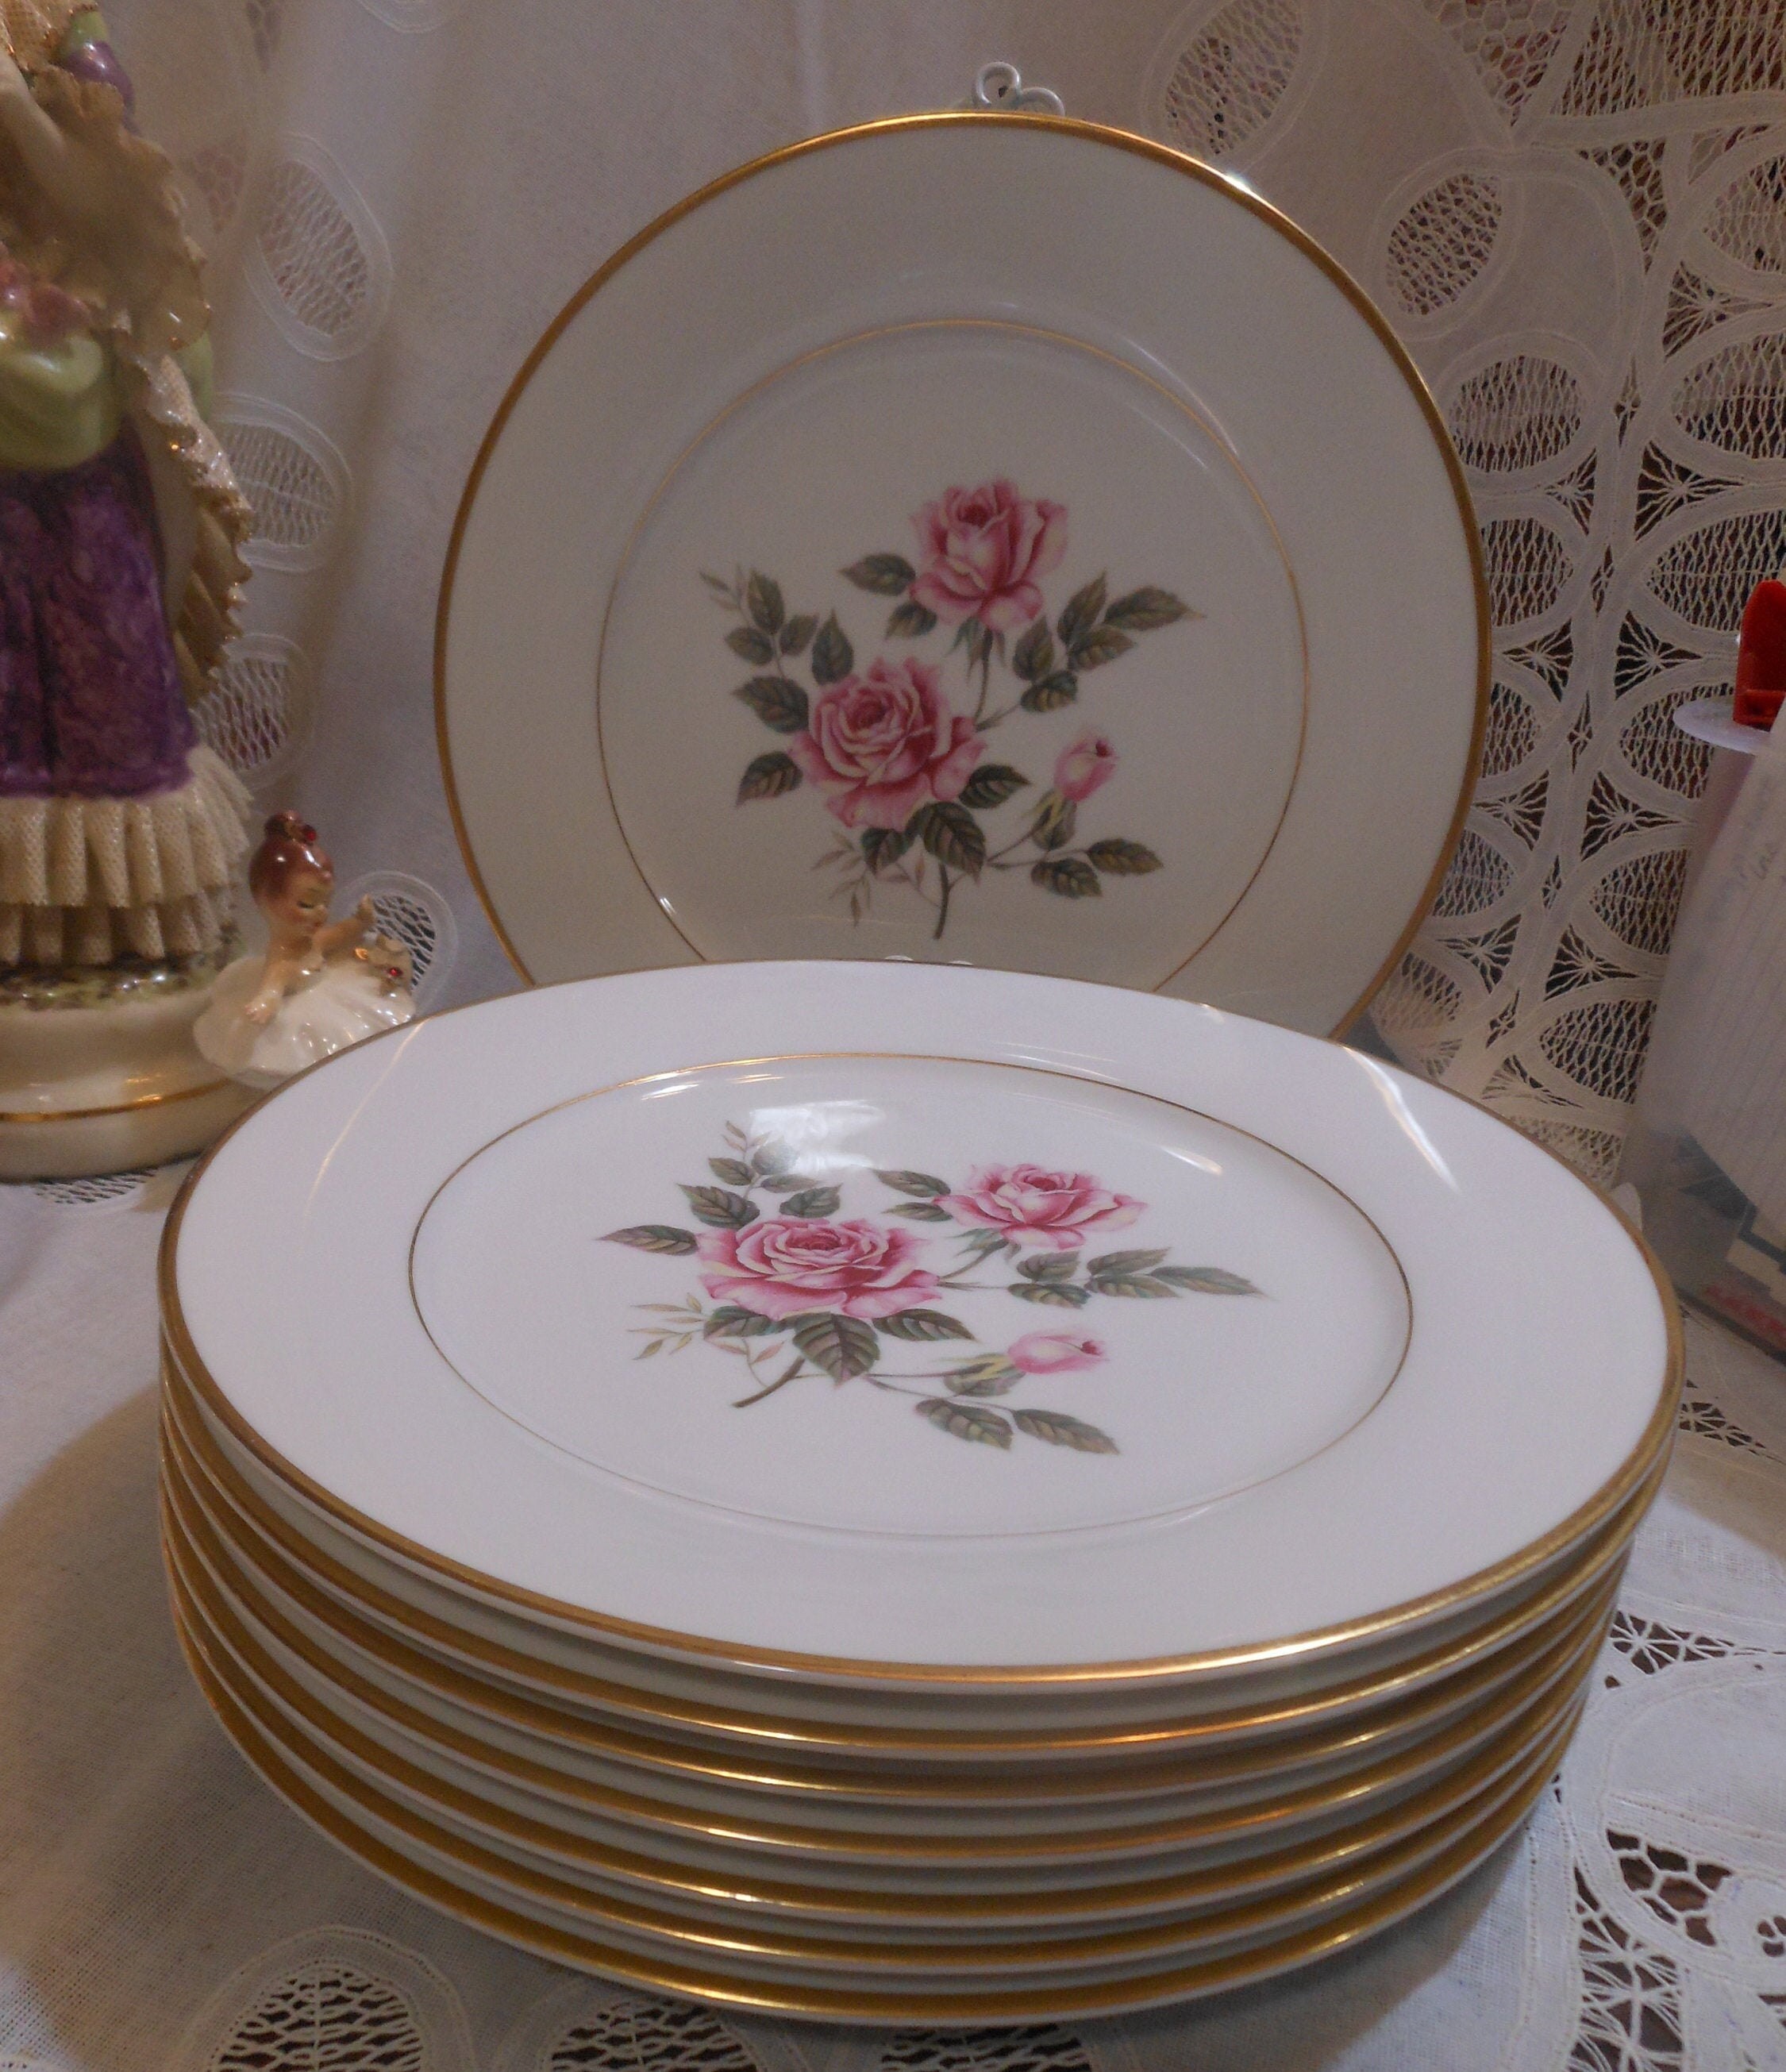 Vintage Noritake Porcelain Plate with Pink Roses and Gold Edging